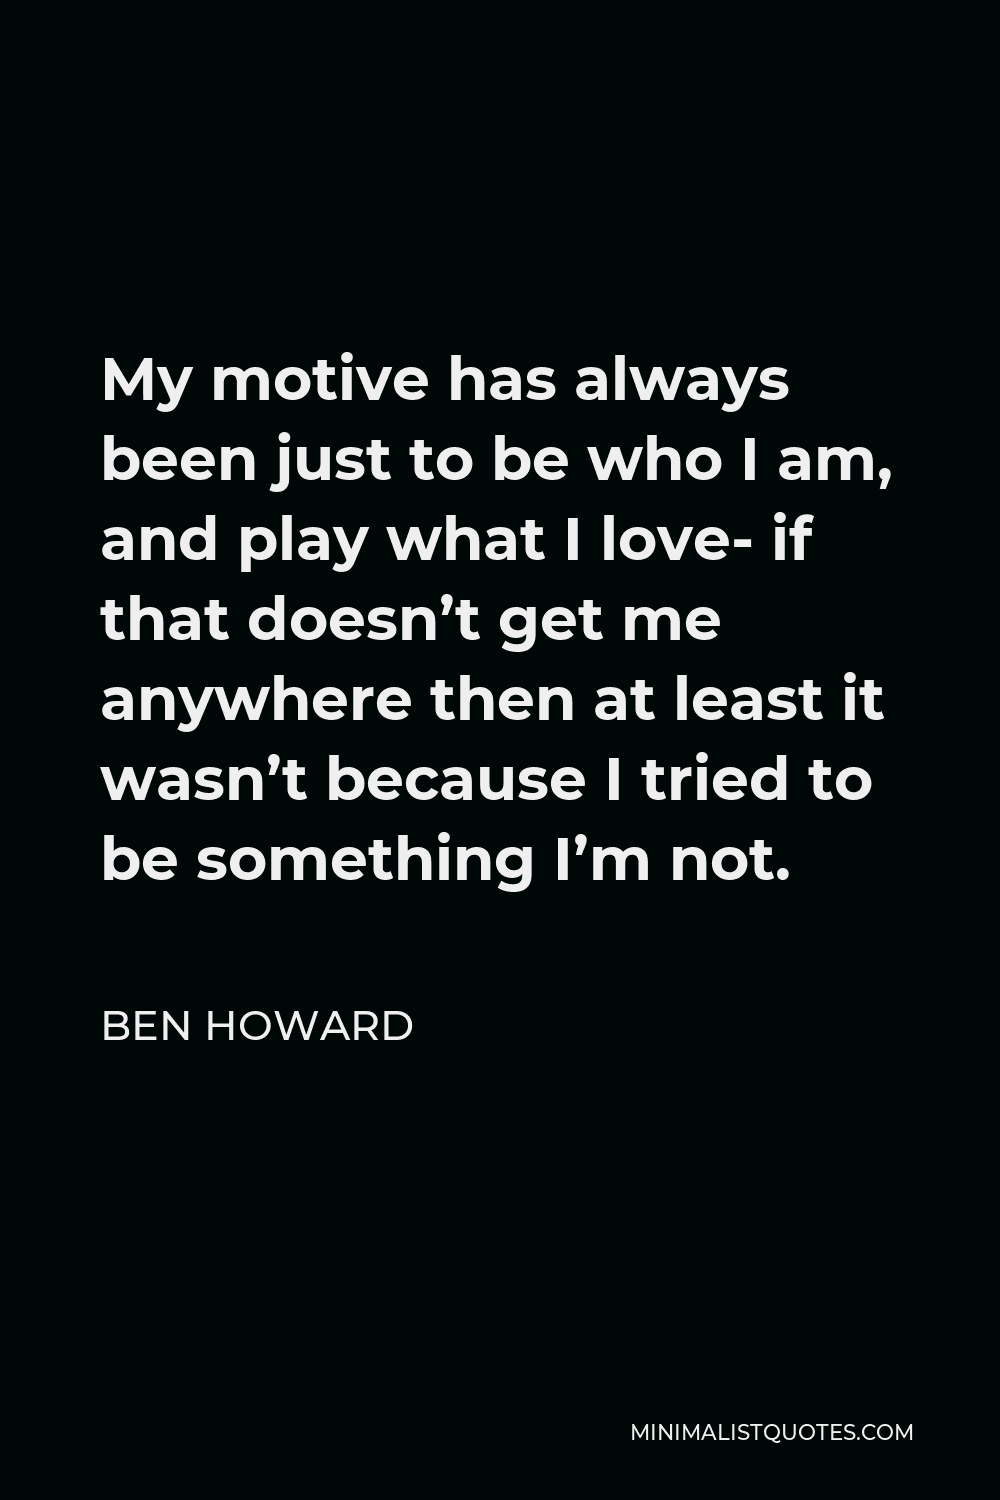 Ben Howard Quote - My motive has always been just to be who I am, and play what I love- if that doesn’t get me anywhere then at least it wasn’t because I tried to be something I’m not.